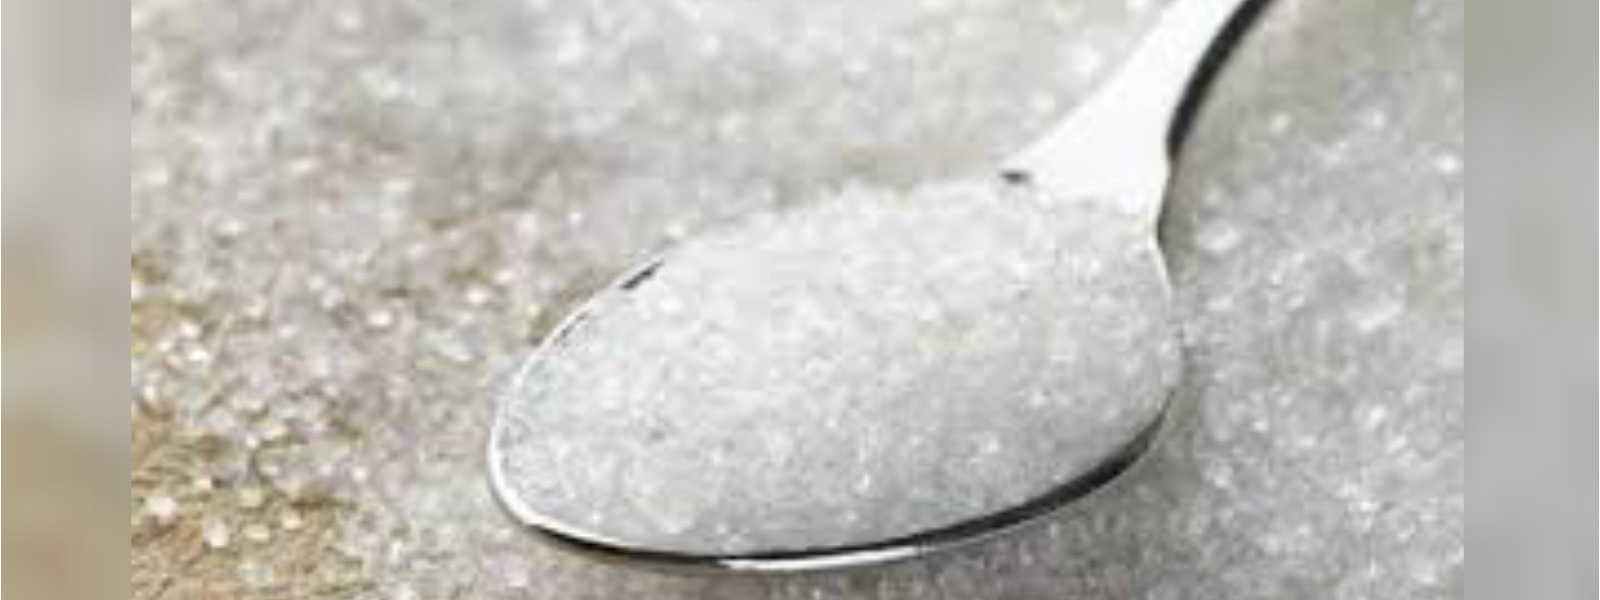 Release US $ to import sugar - Importers